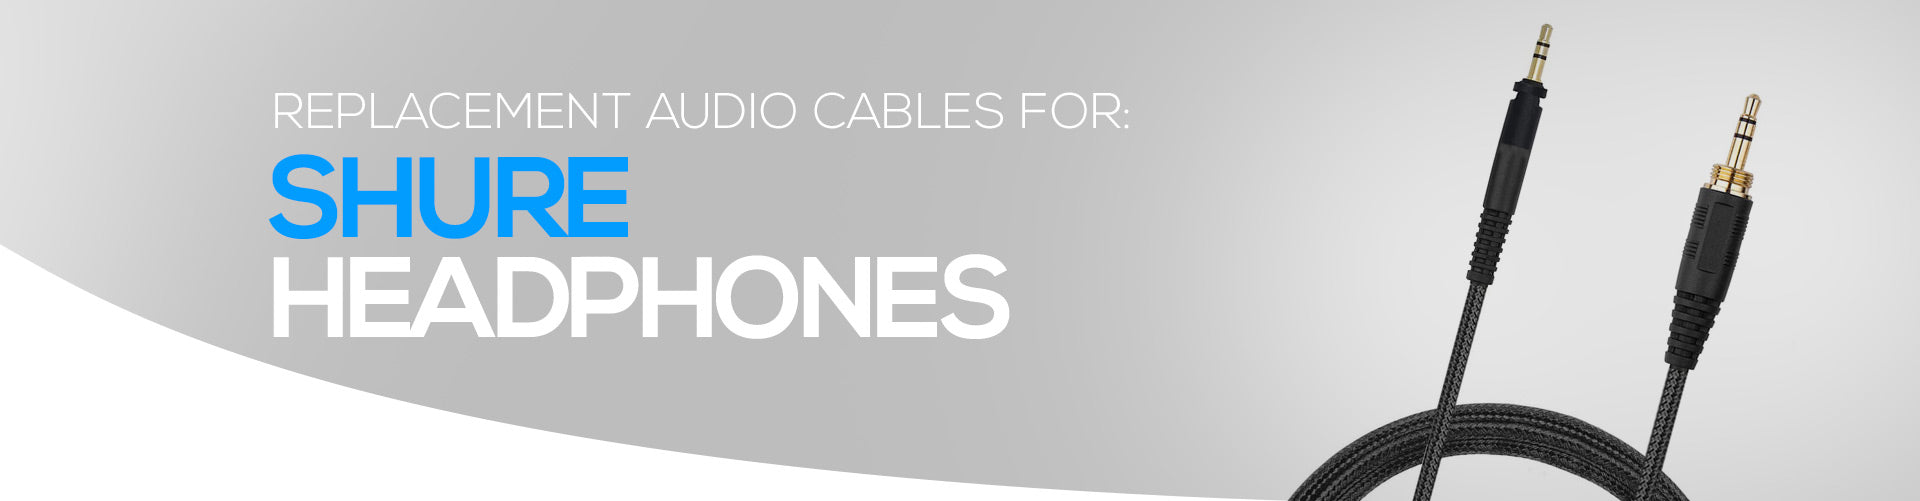 Audio Cables For Shure Headphones